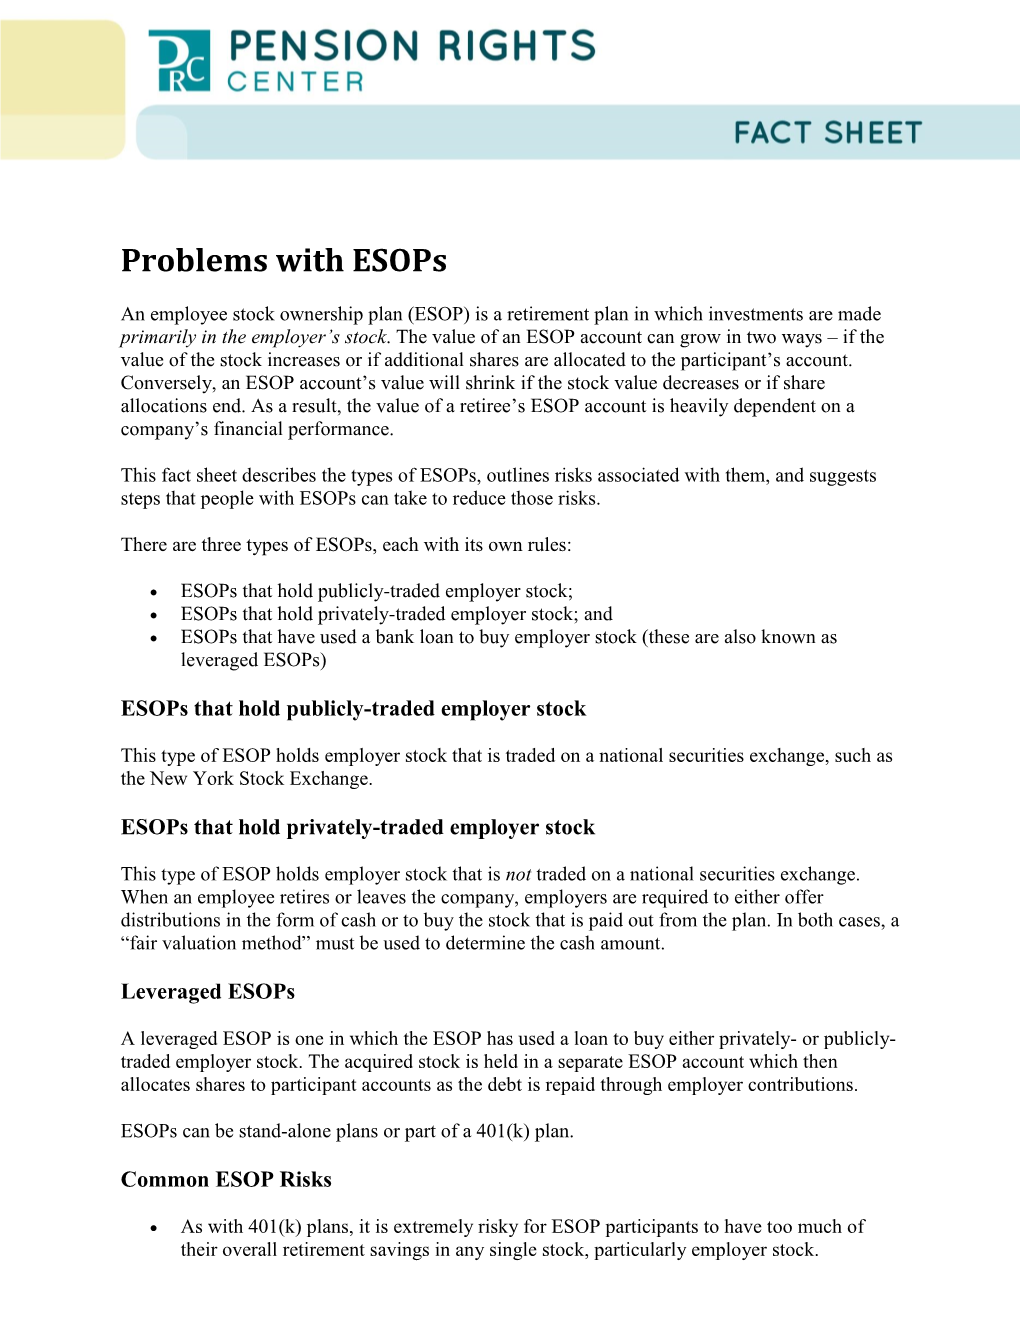 Problems with Esops